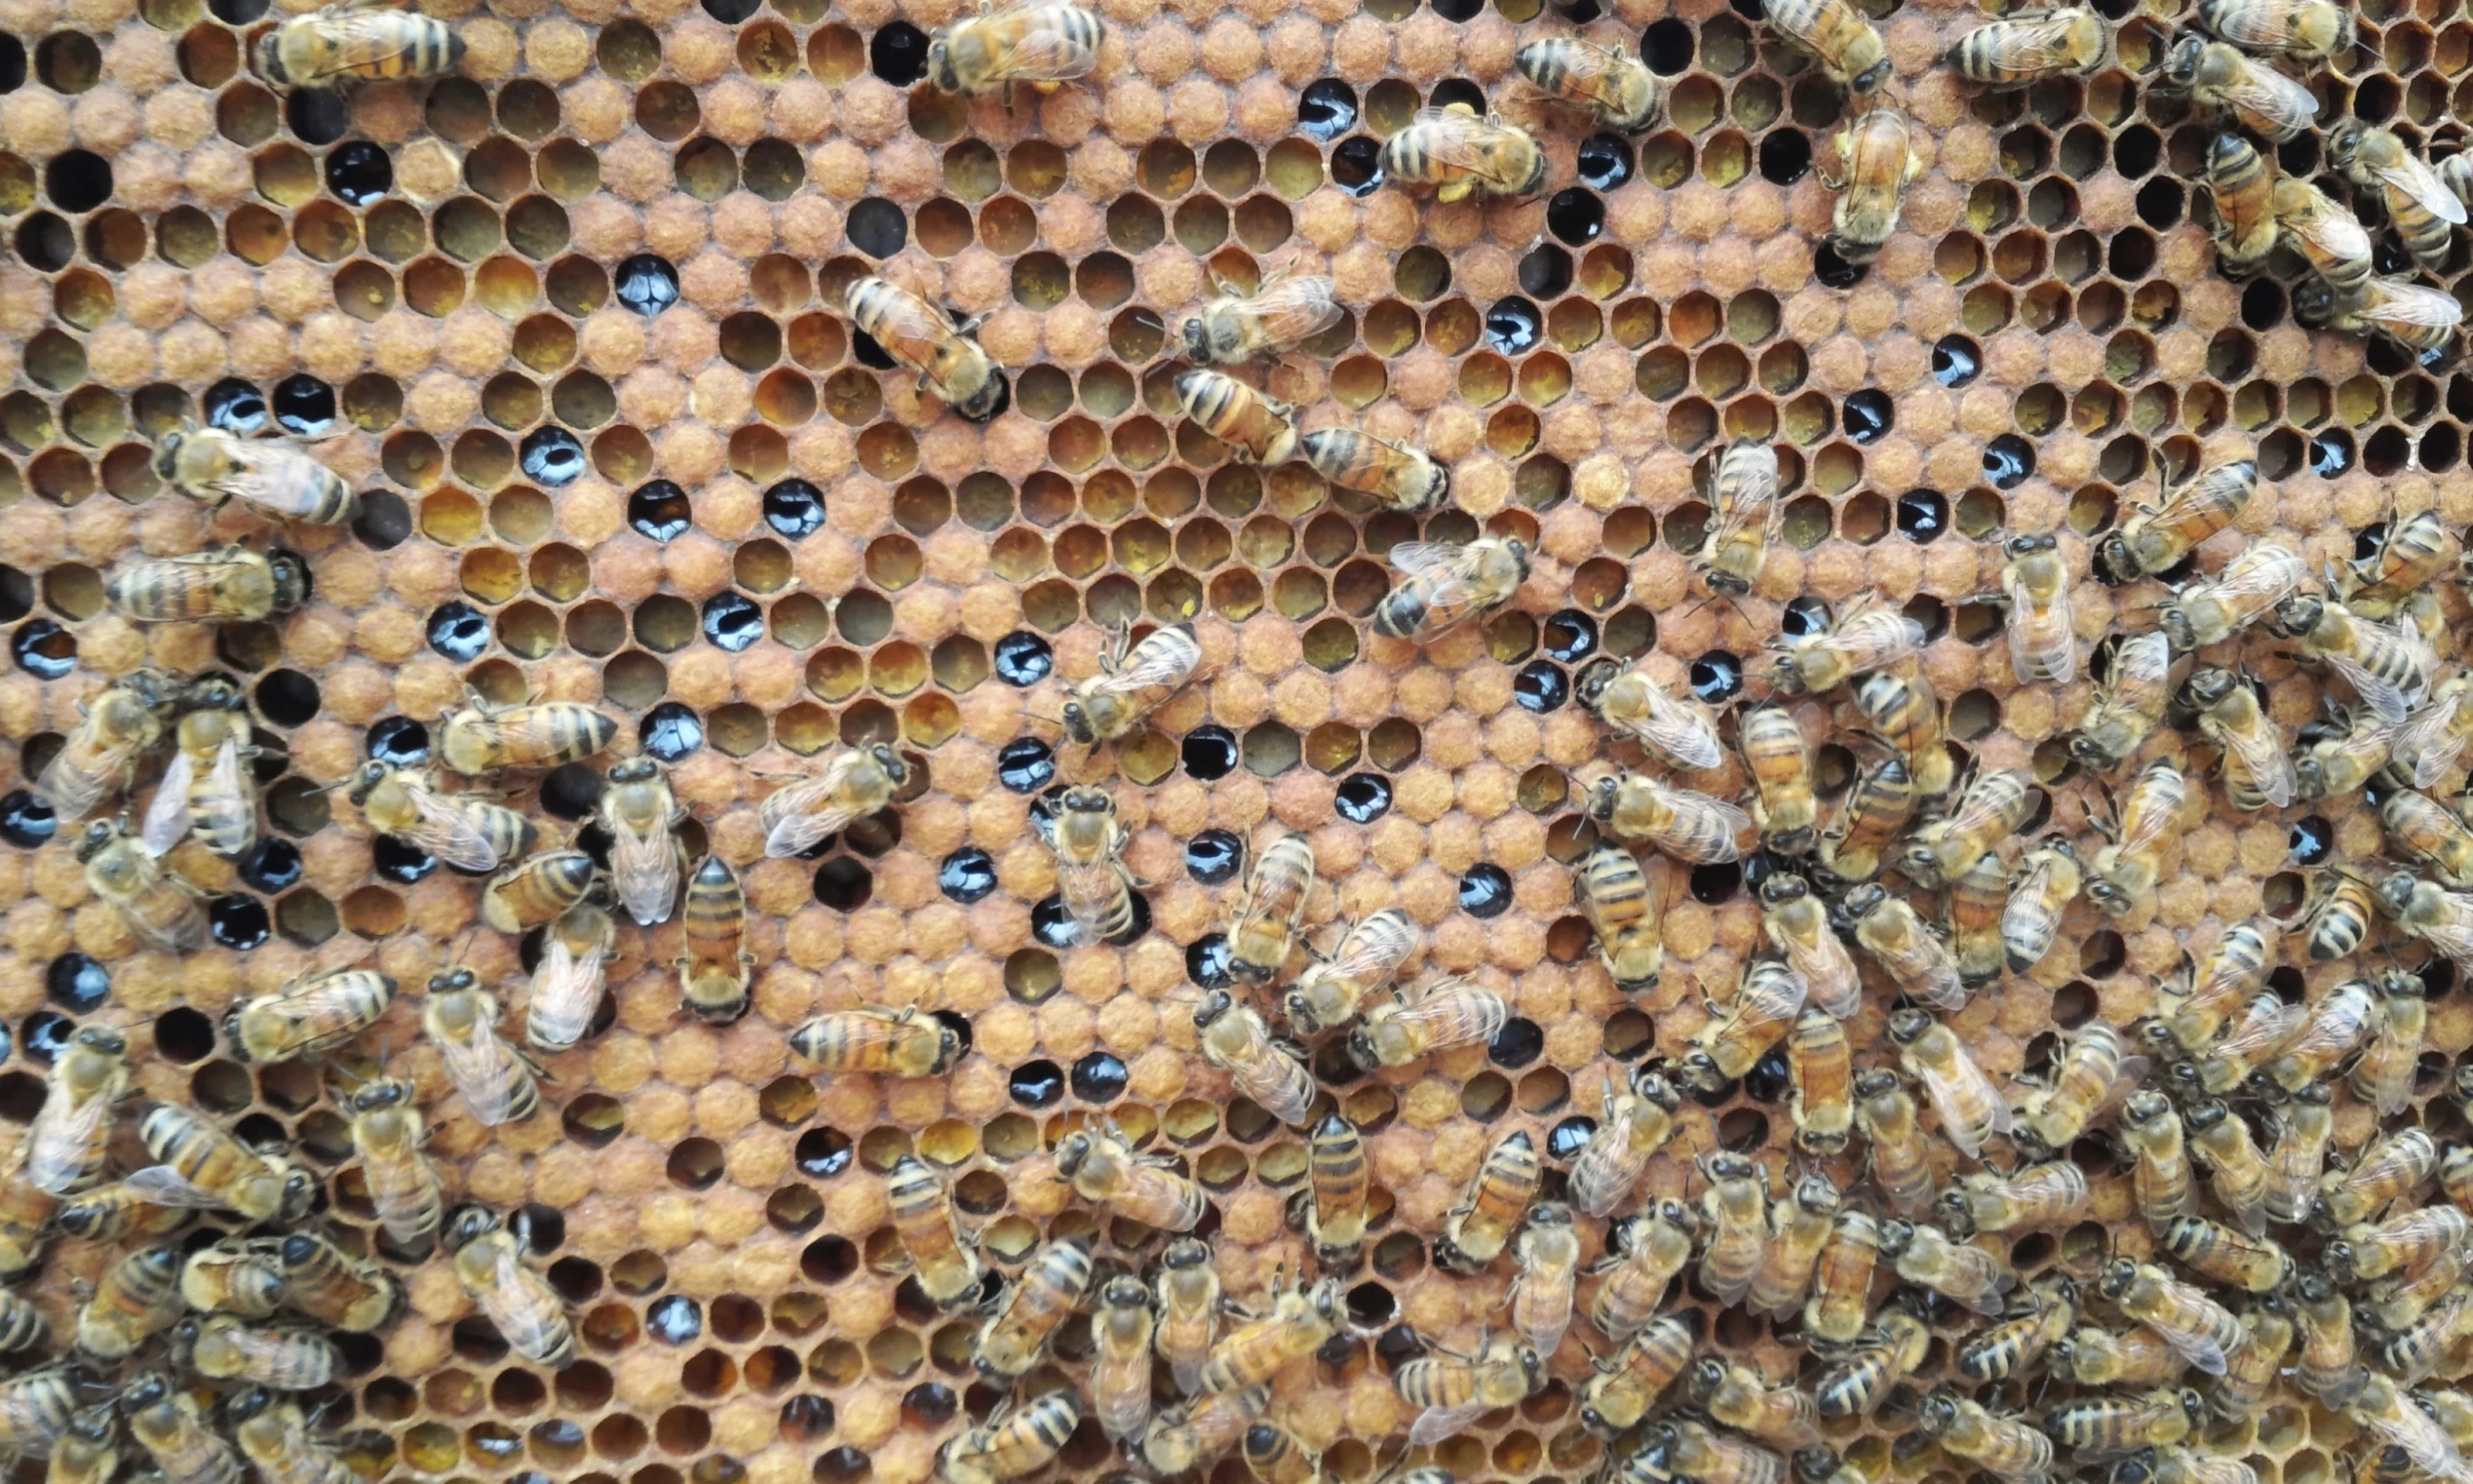 several bees sit inside a honeycomb with their babies in it